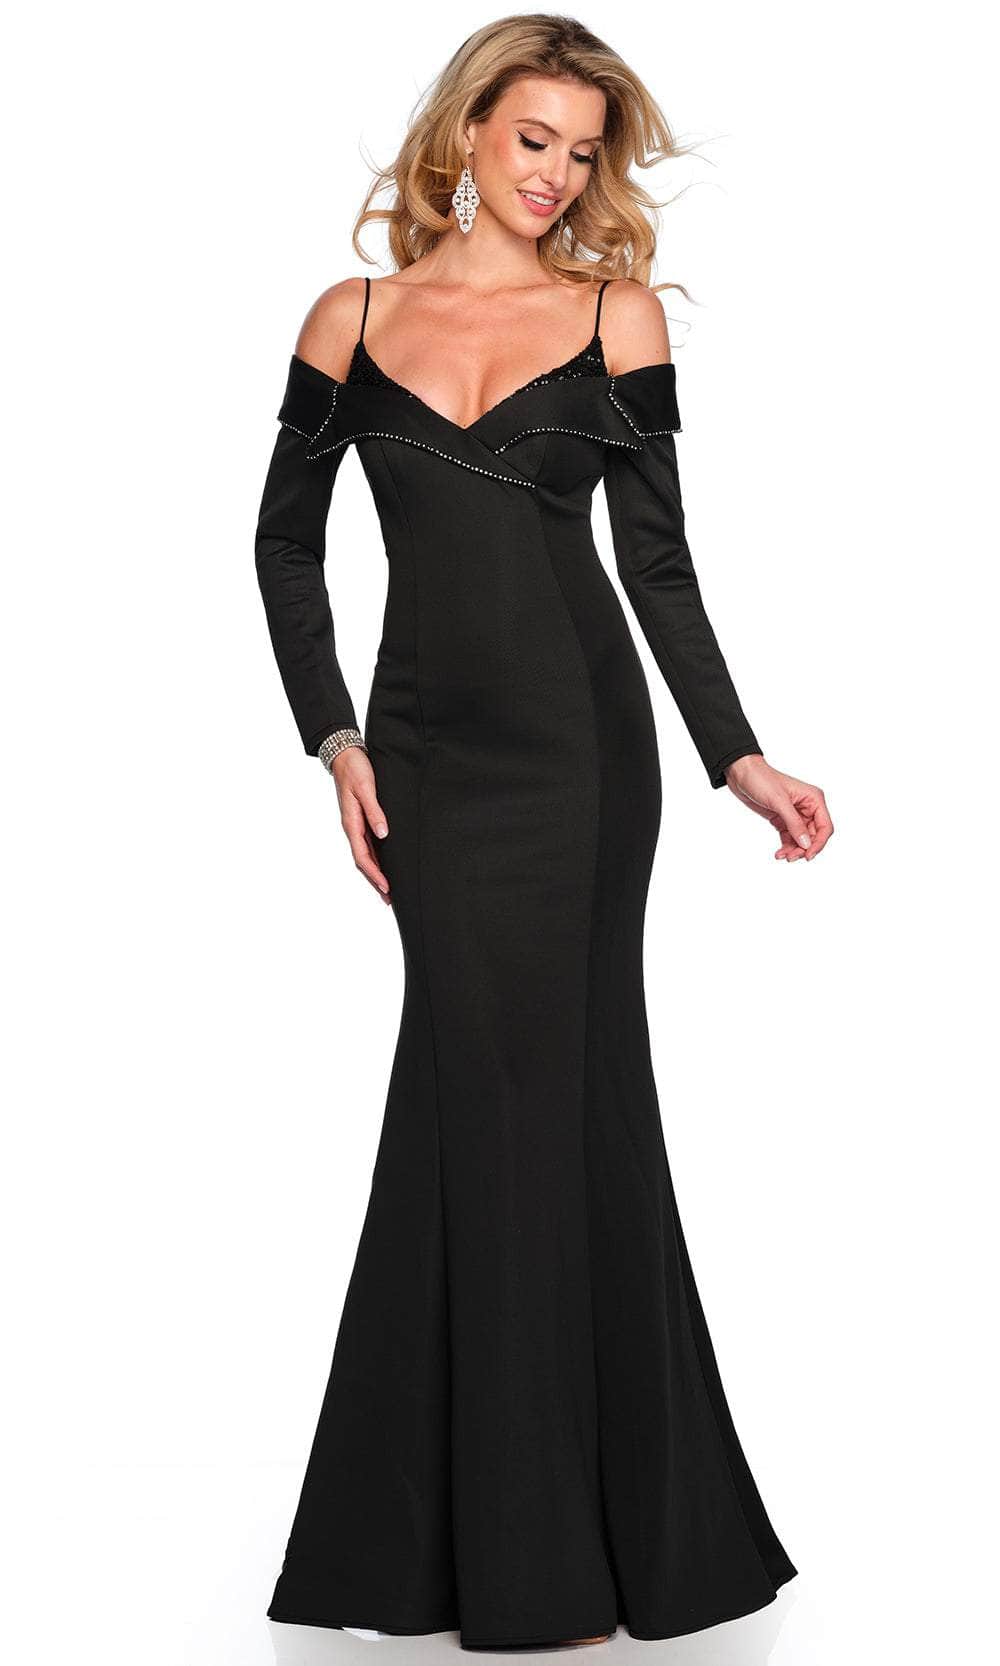 Image of Dave & Johnny 11434 - Long Sleeve Cold Shoulder Evening Gown